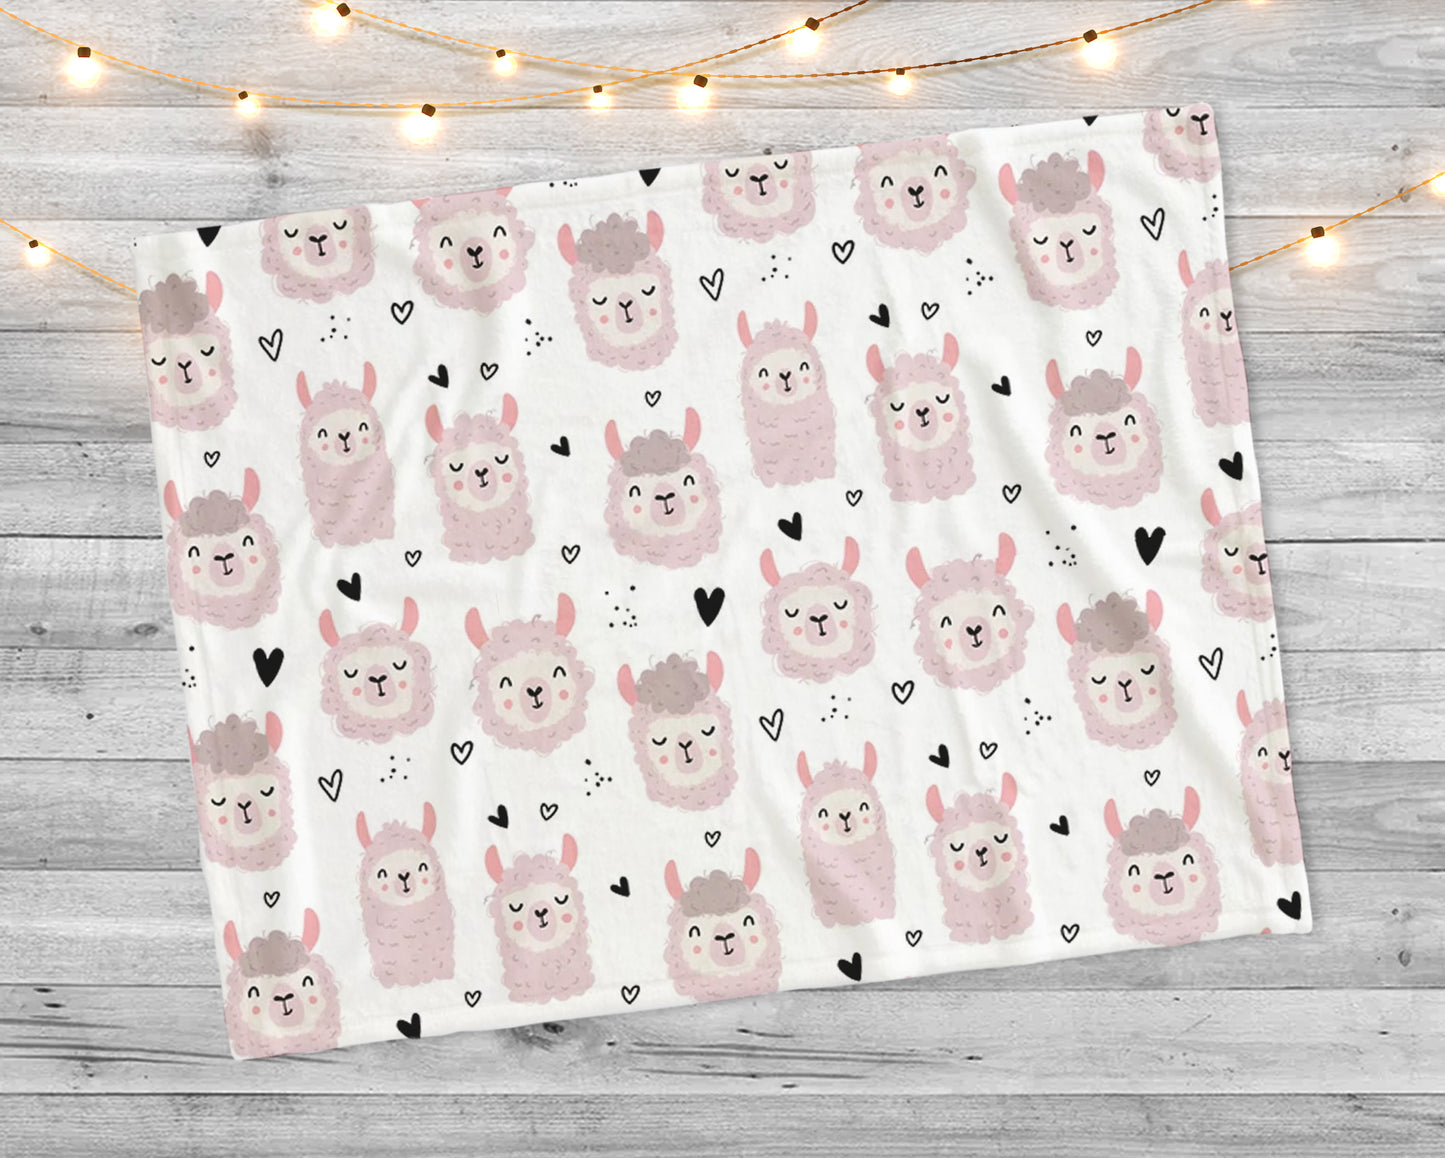 Cute lamas and hearts in Scandinavian style pattern with cute animals printed Minky Blanket